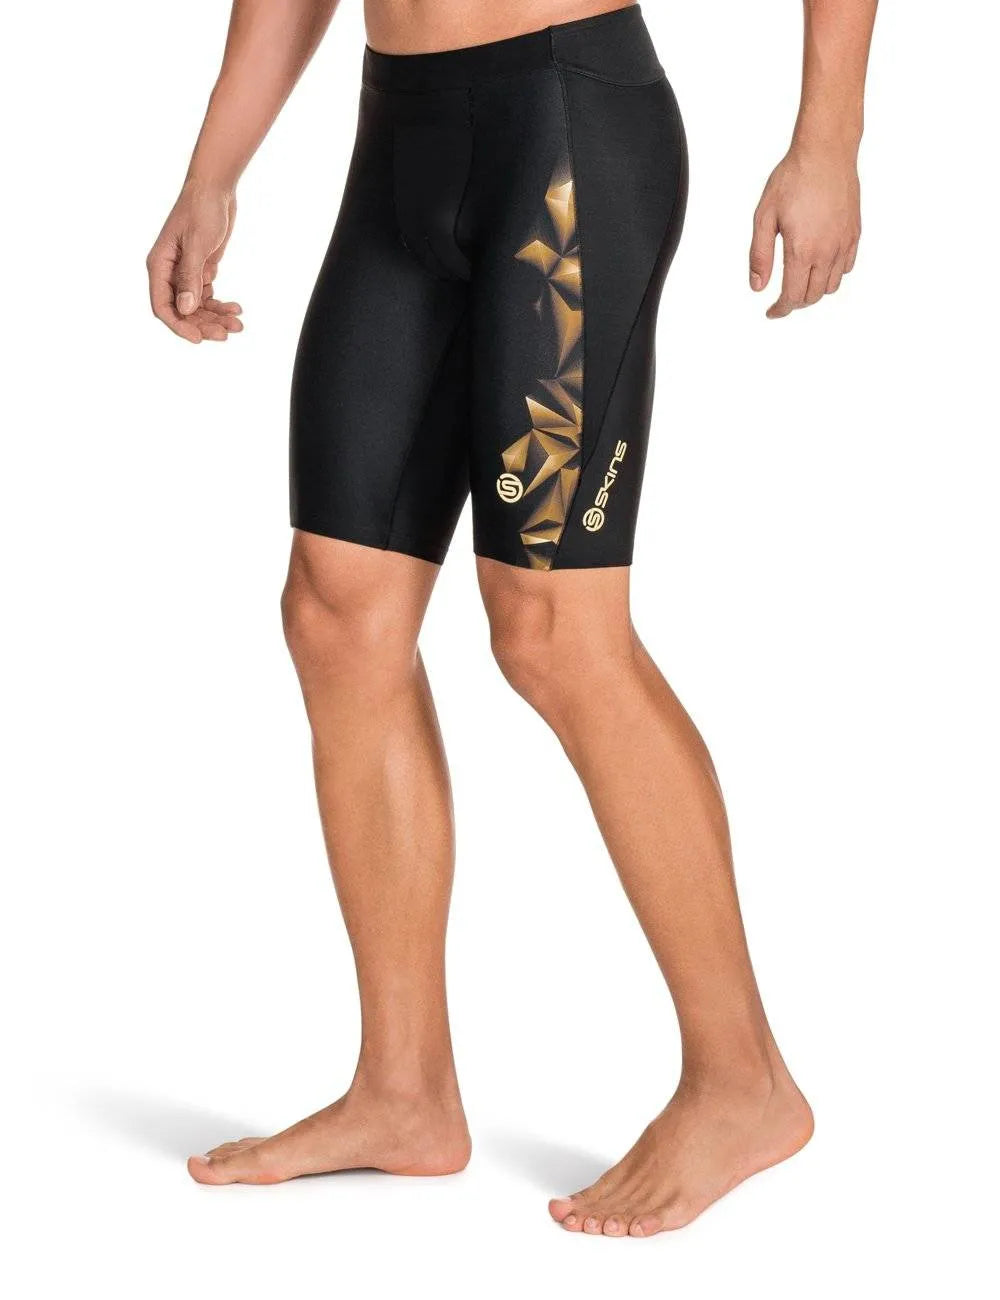 Men's black and gold Skins A400 1/2 tights with compression technology for performance and comfort.